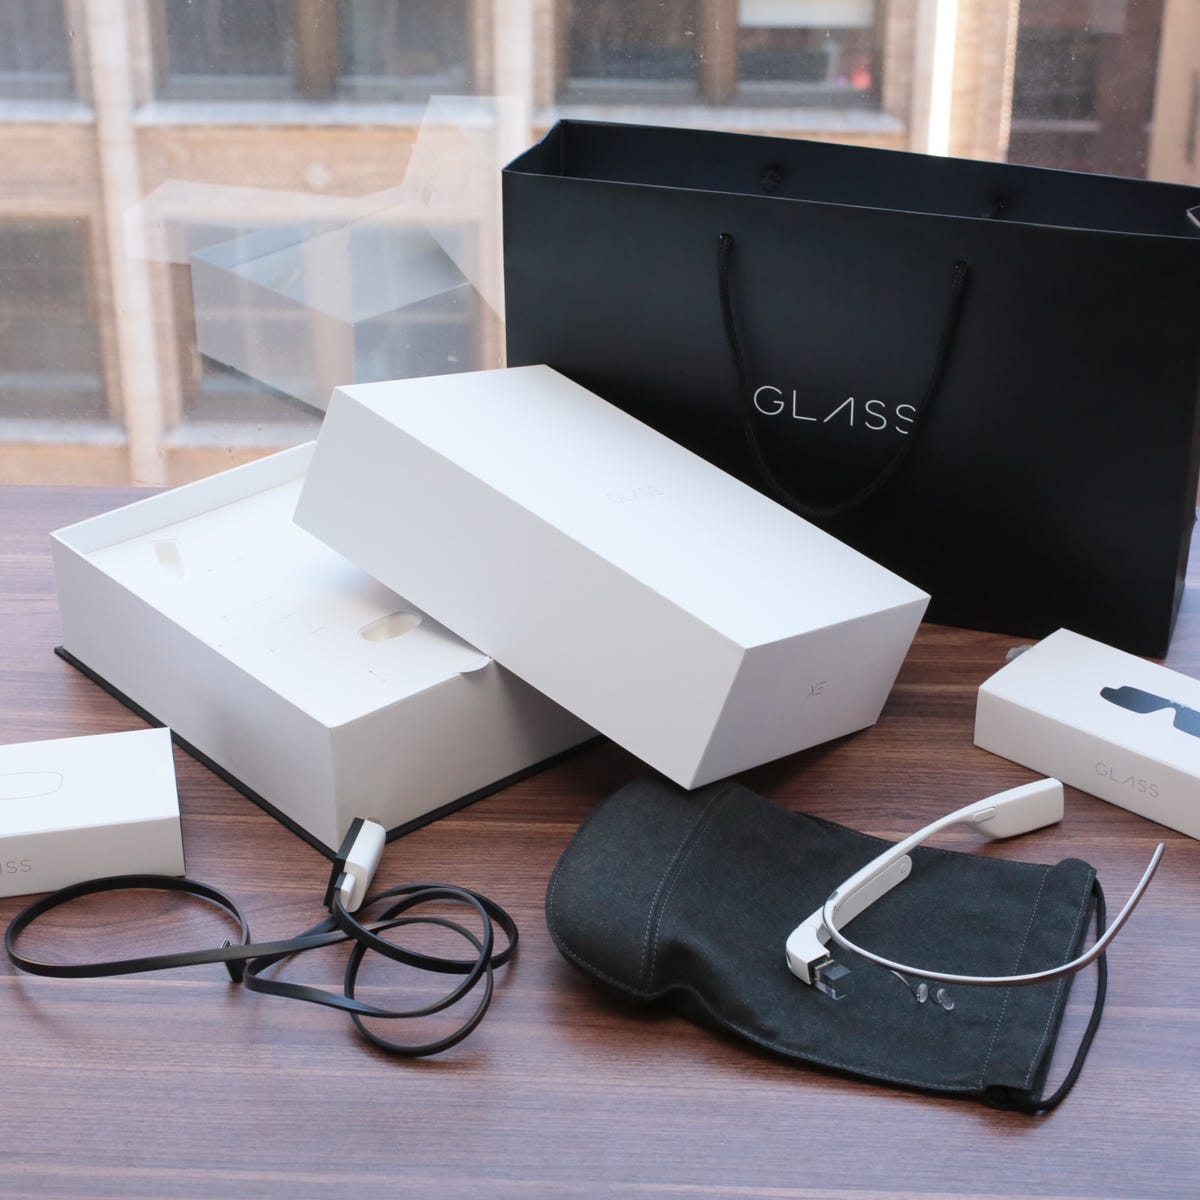 Orient Legitim Pind Google Glass Explorer Edition review: Hands-on with Google Glass: Limited,  fascinating, full of potential - CNET